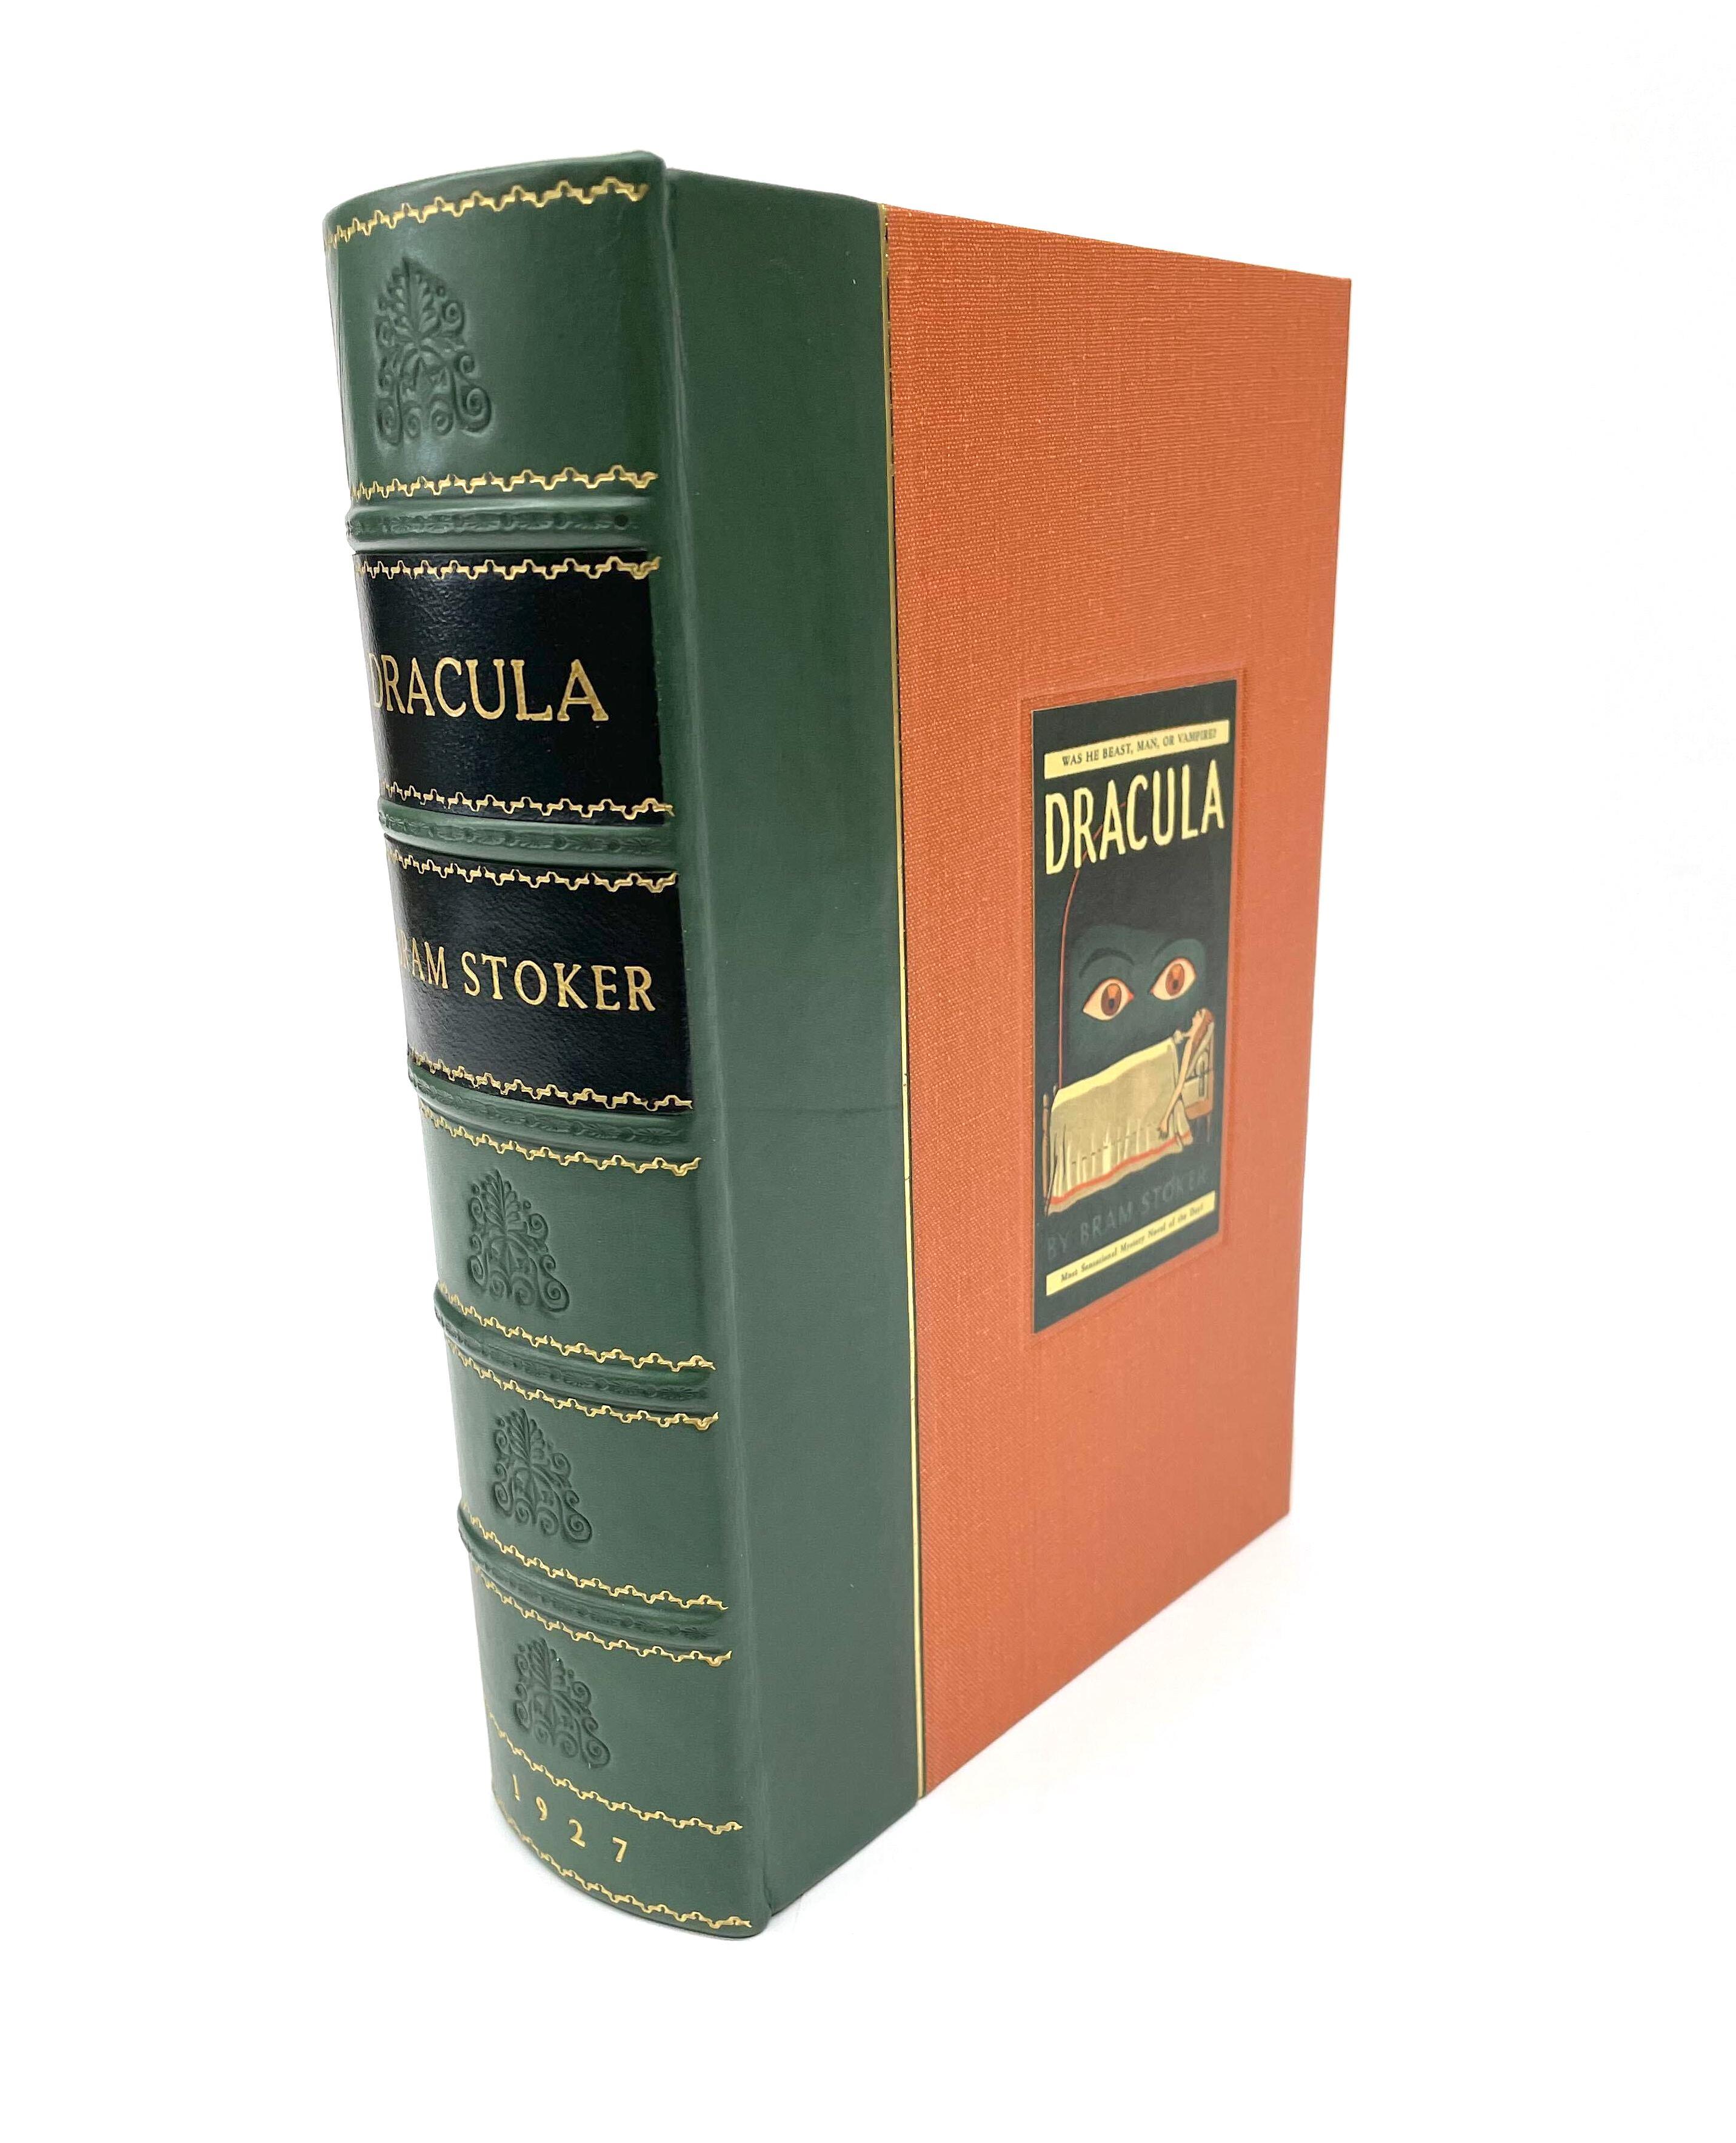 Dracula by Bram Stoker, First Grosset & Dunlap Edition, 1927 For Sale 2